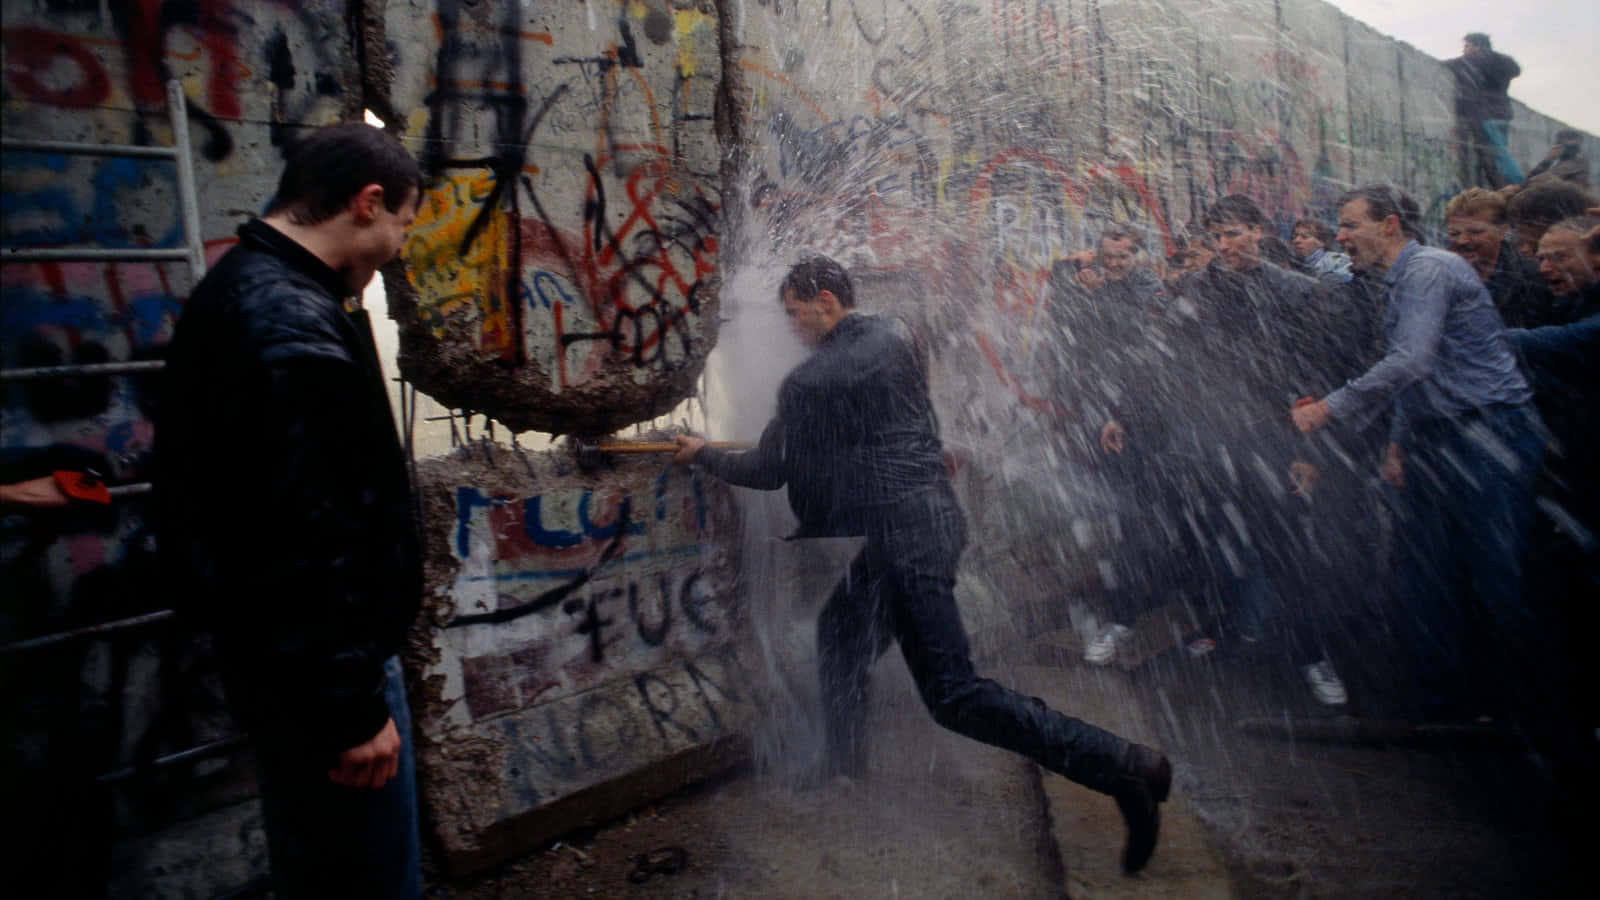 Police Spraying West Germans In Berlin Wall Picture